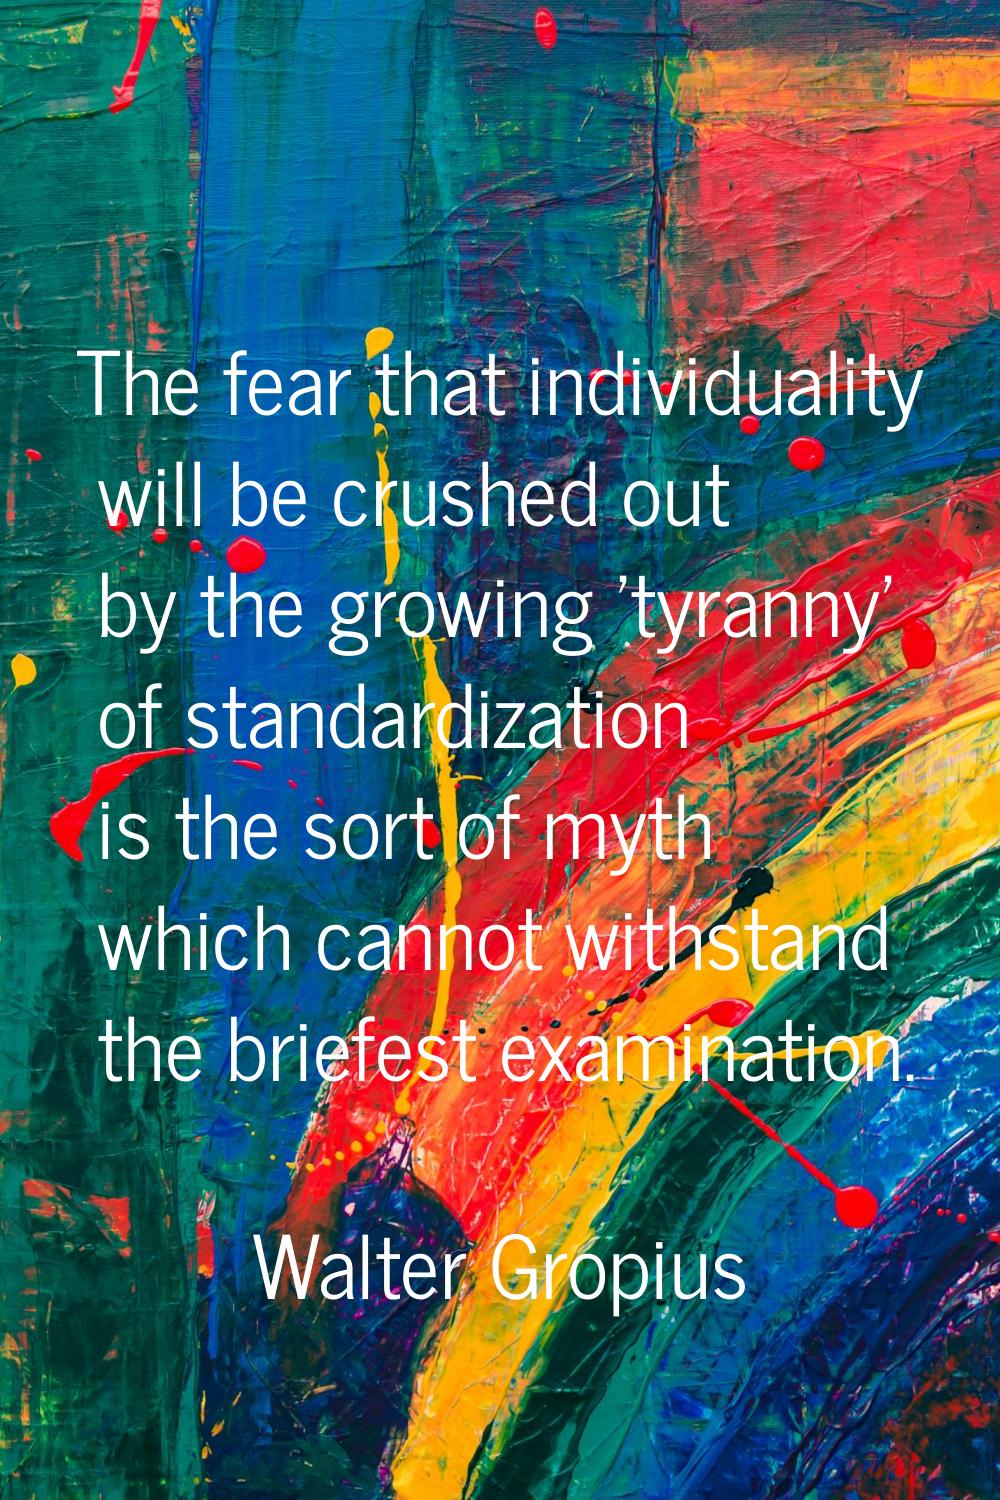 The fear that individuality will be crushed out by the growing 'tyranny' of standardization is the 